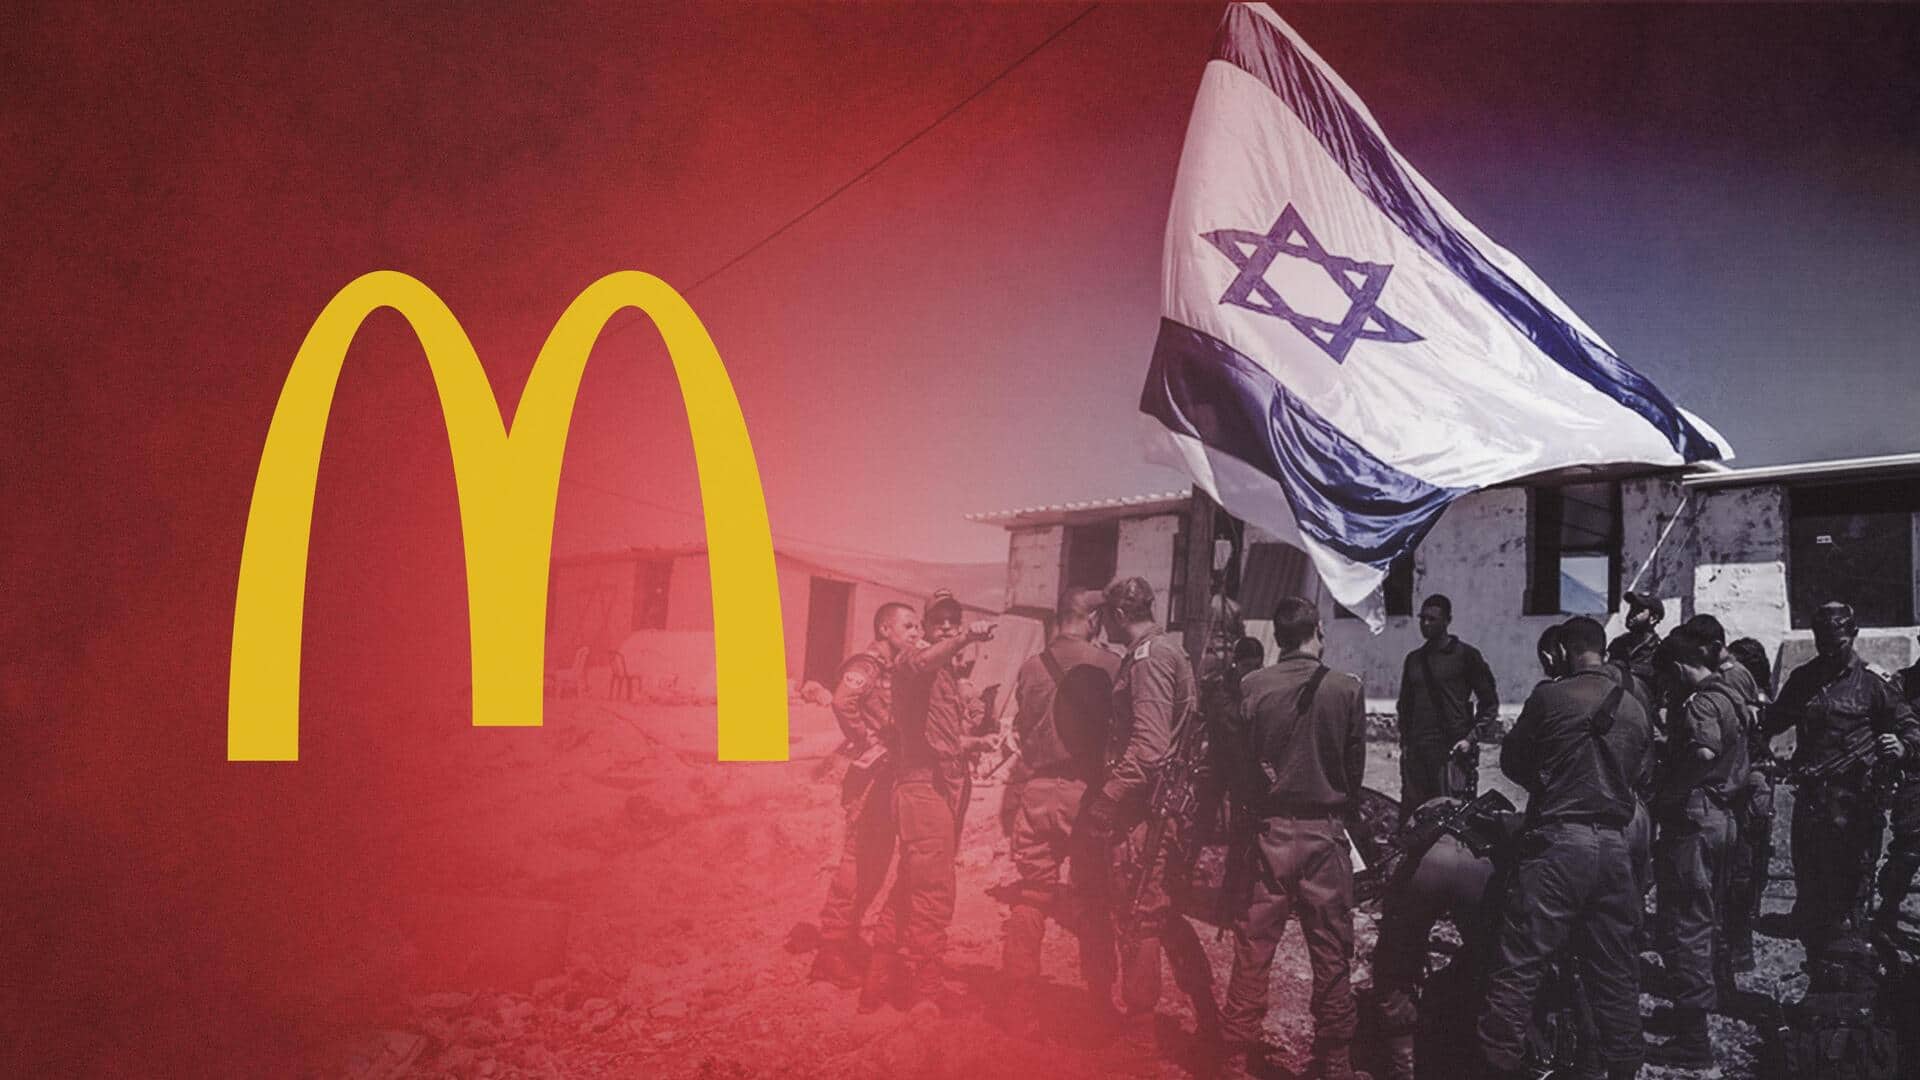 McDonald's faces backlash for free meals to Israel soldiers